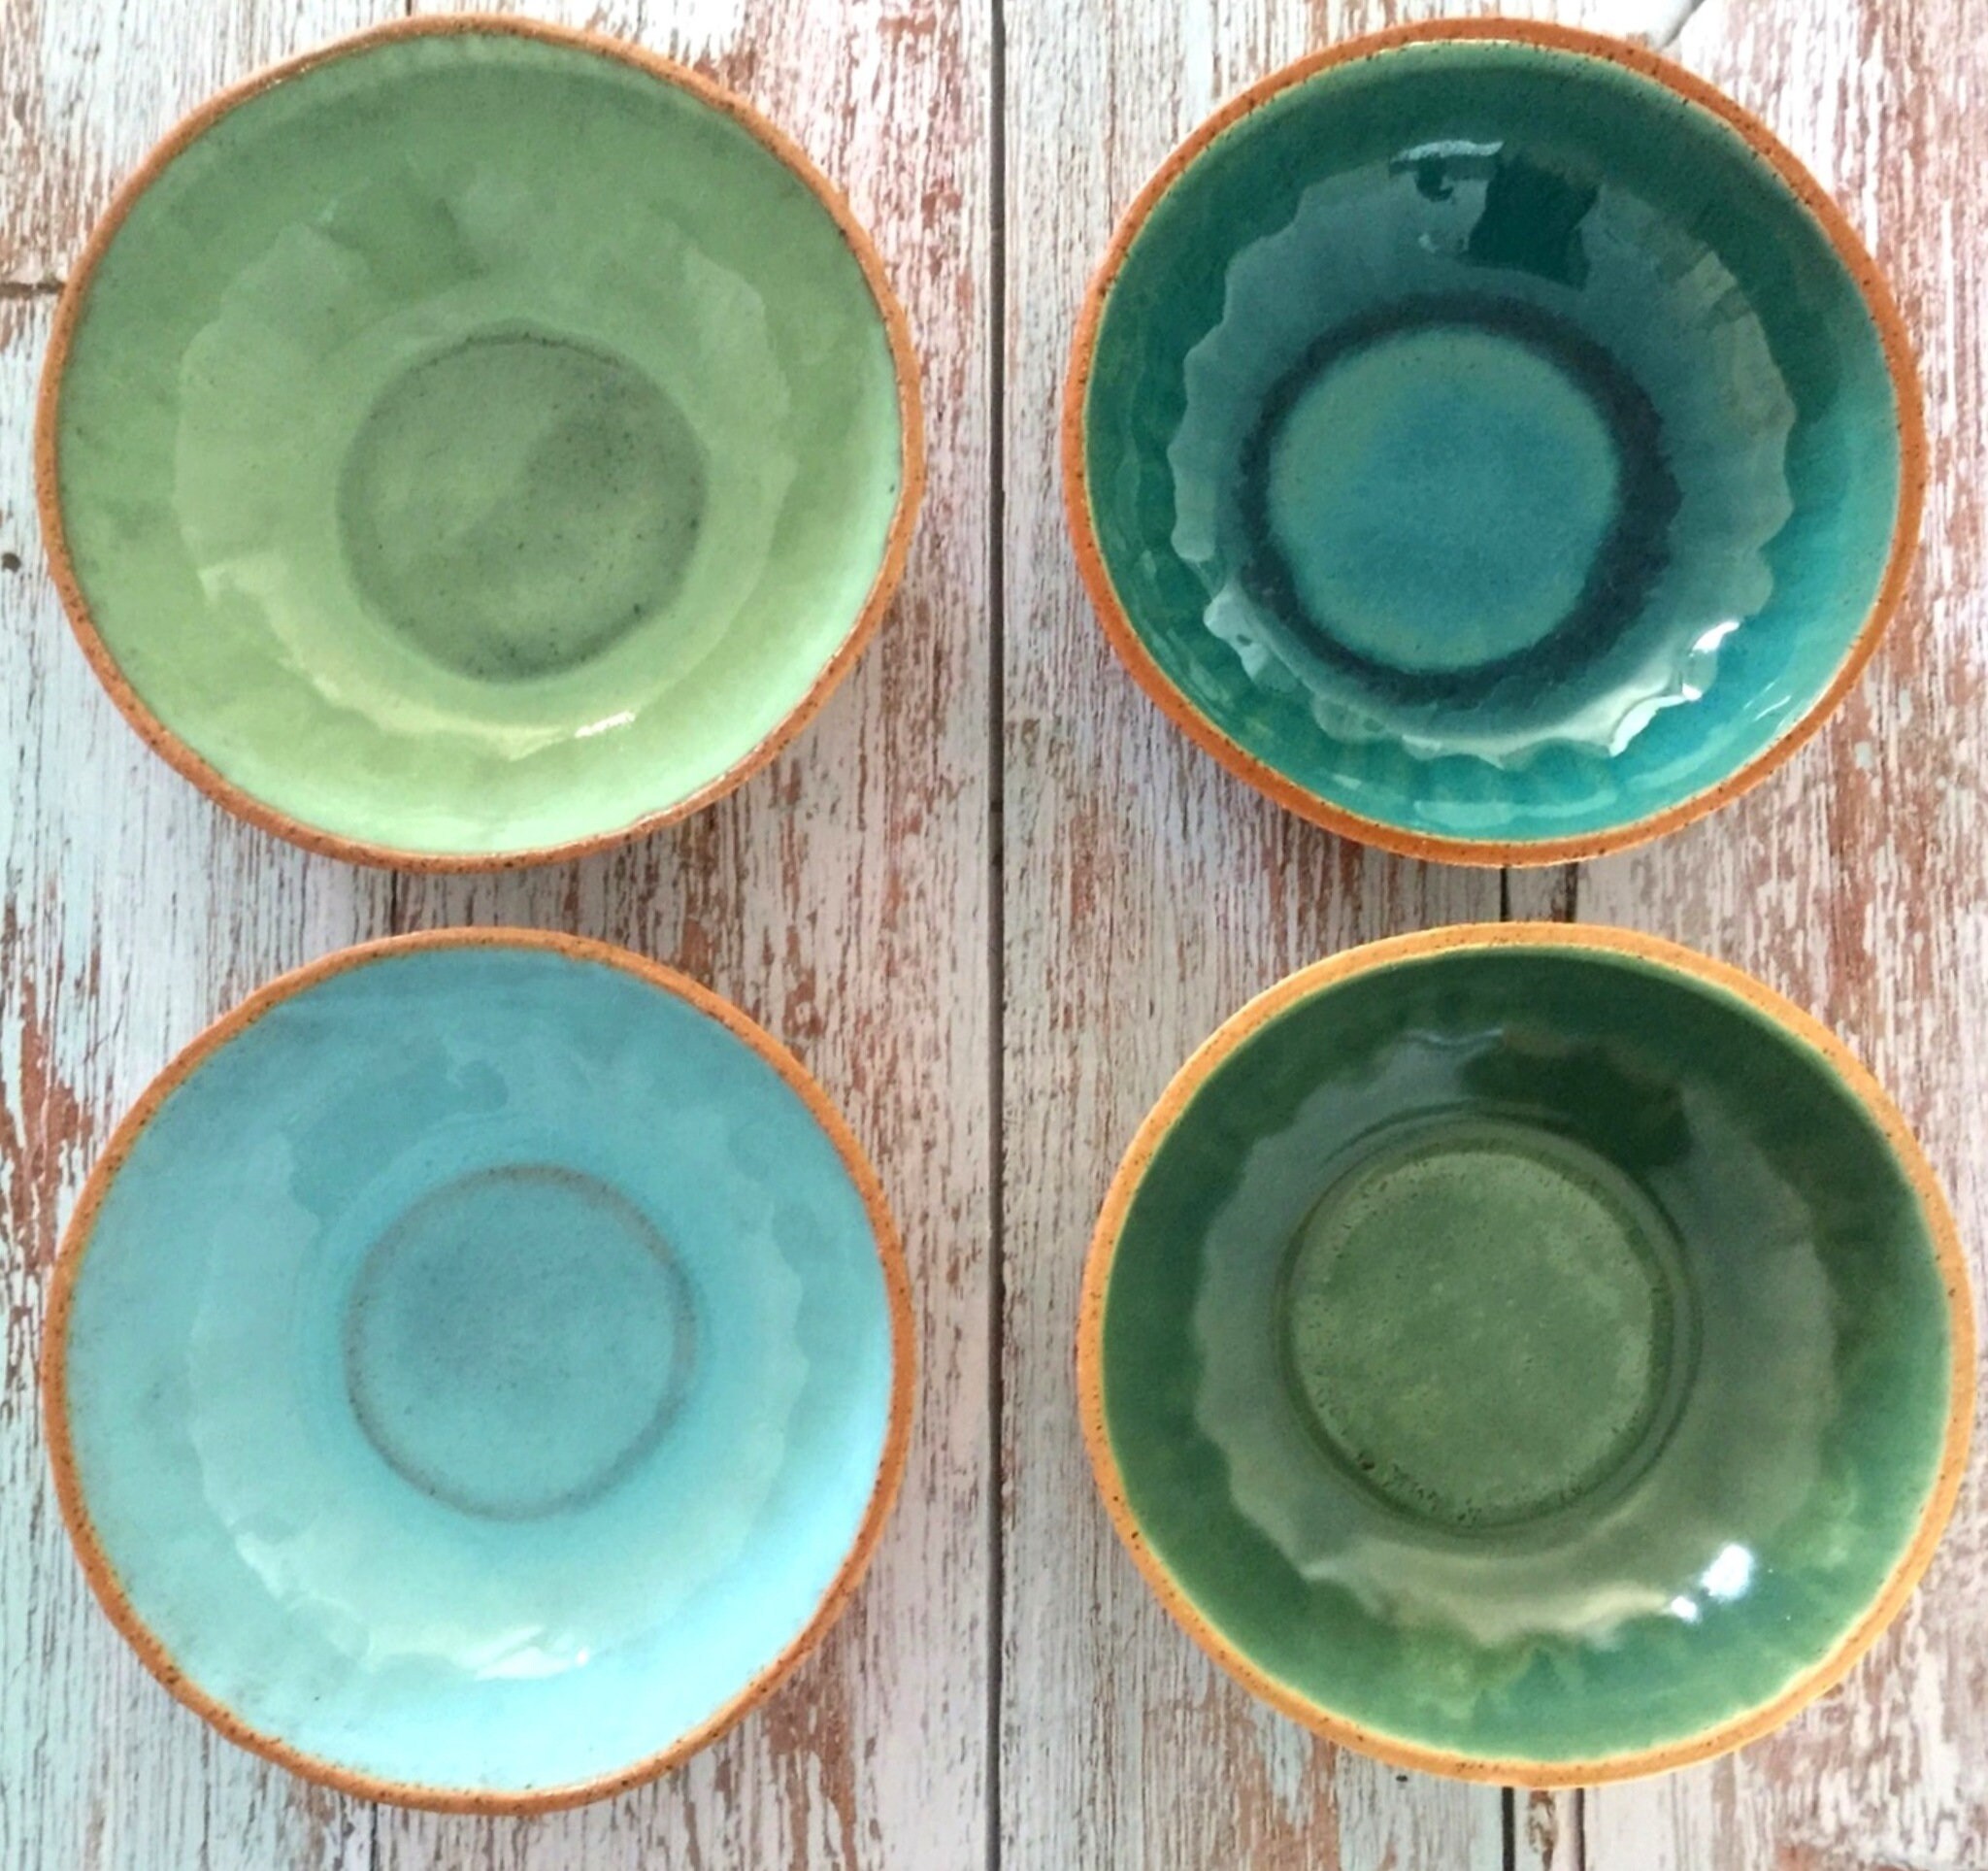 Ceramic Bowl Set Of 4 For Ramen, Cereal, Salad, Soup Or Pasta in Blue, Turquoise, & Green, Handmade Pottery Bowls, Housewarming Gift